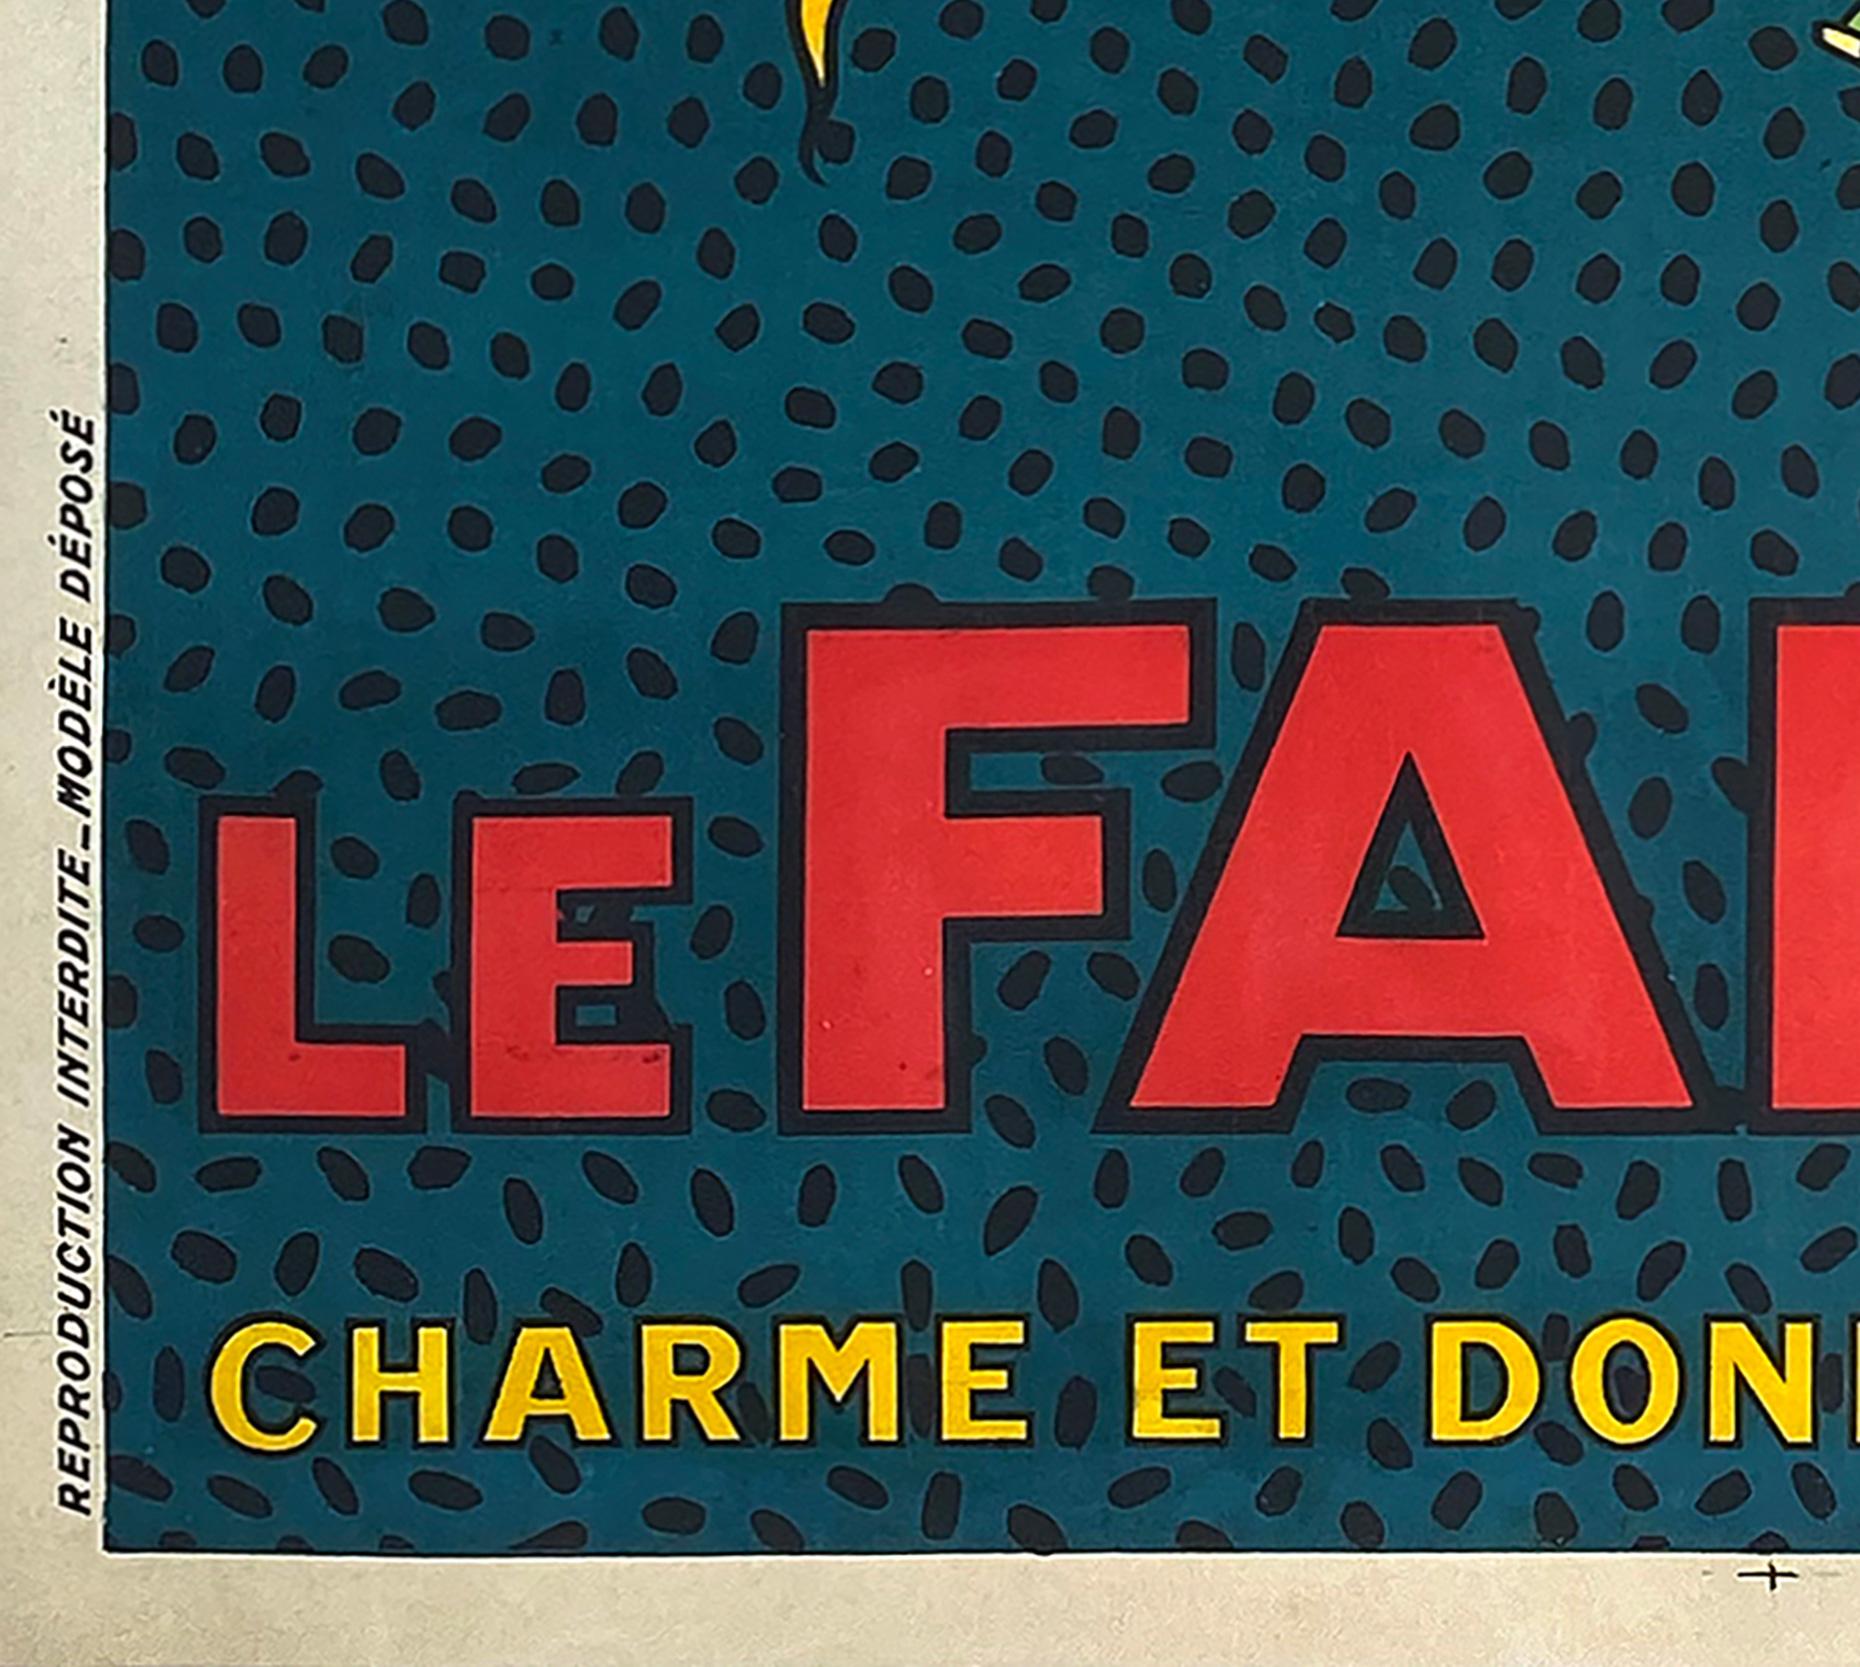 Le Fakyr, C1920 Vintage French Alcohol Advertising Poster, Michel Liebeaux 1